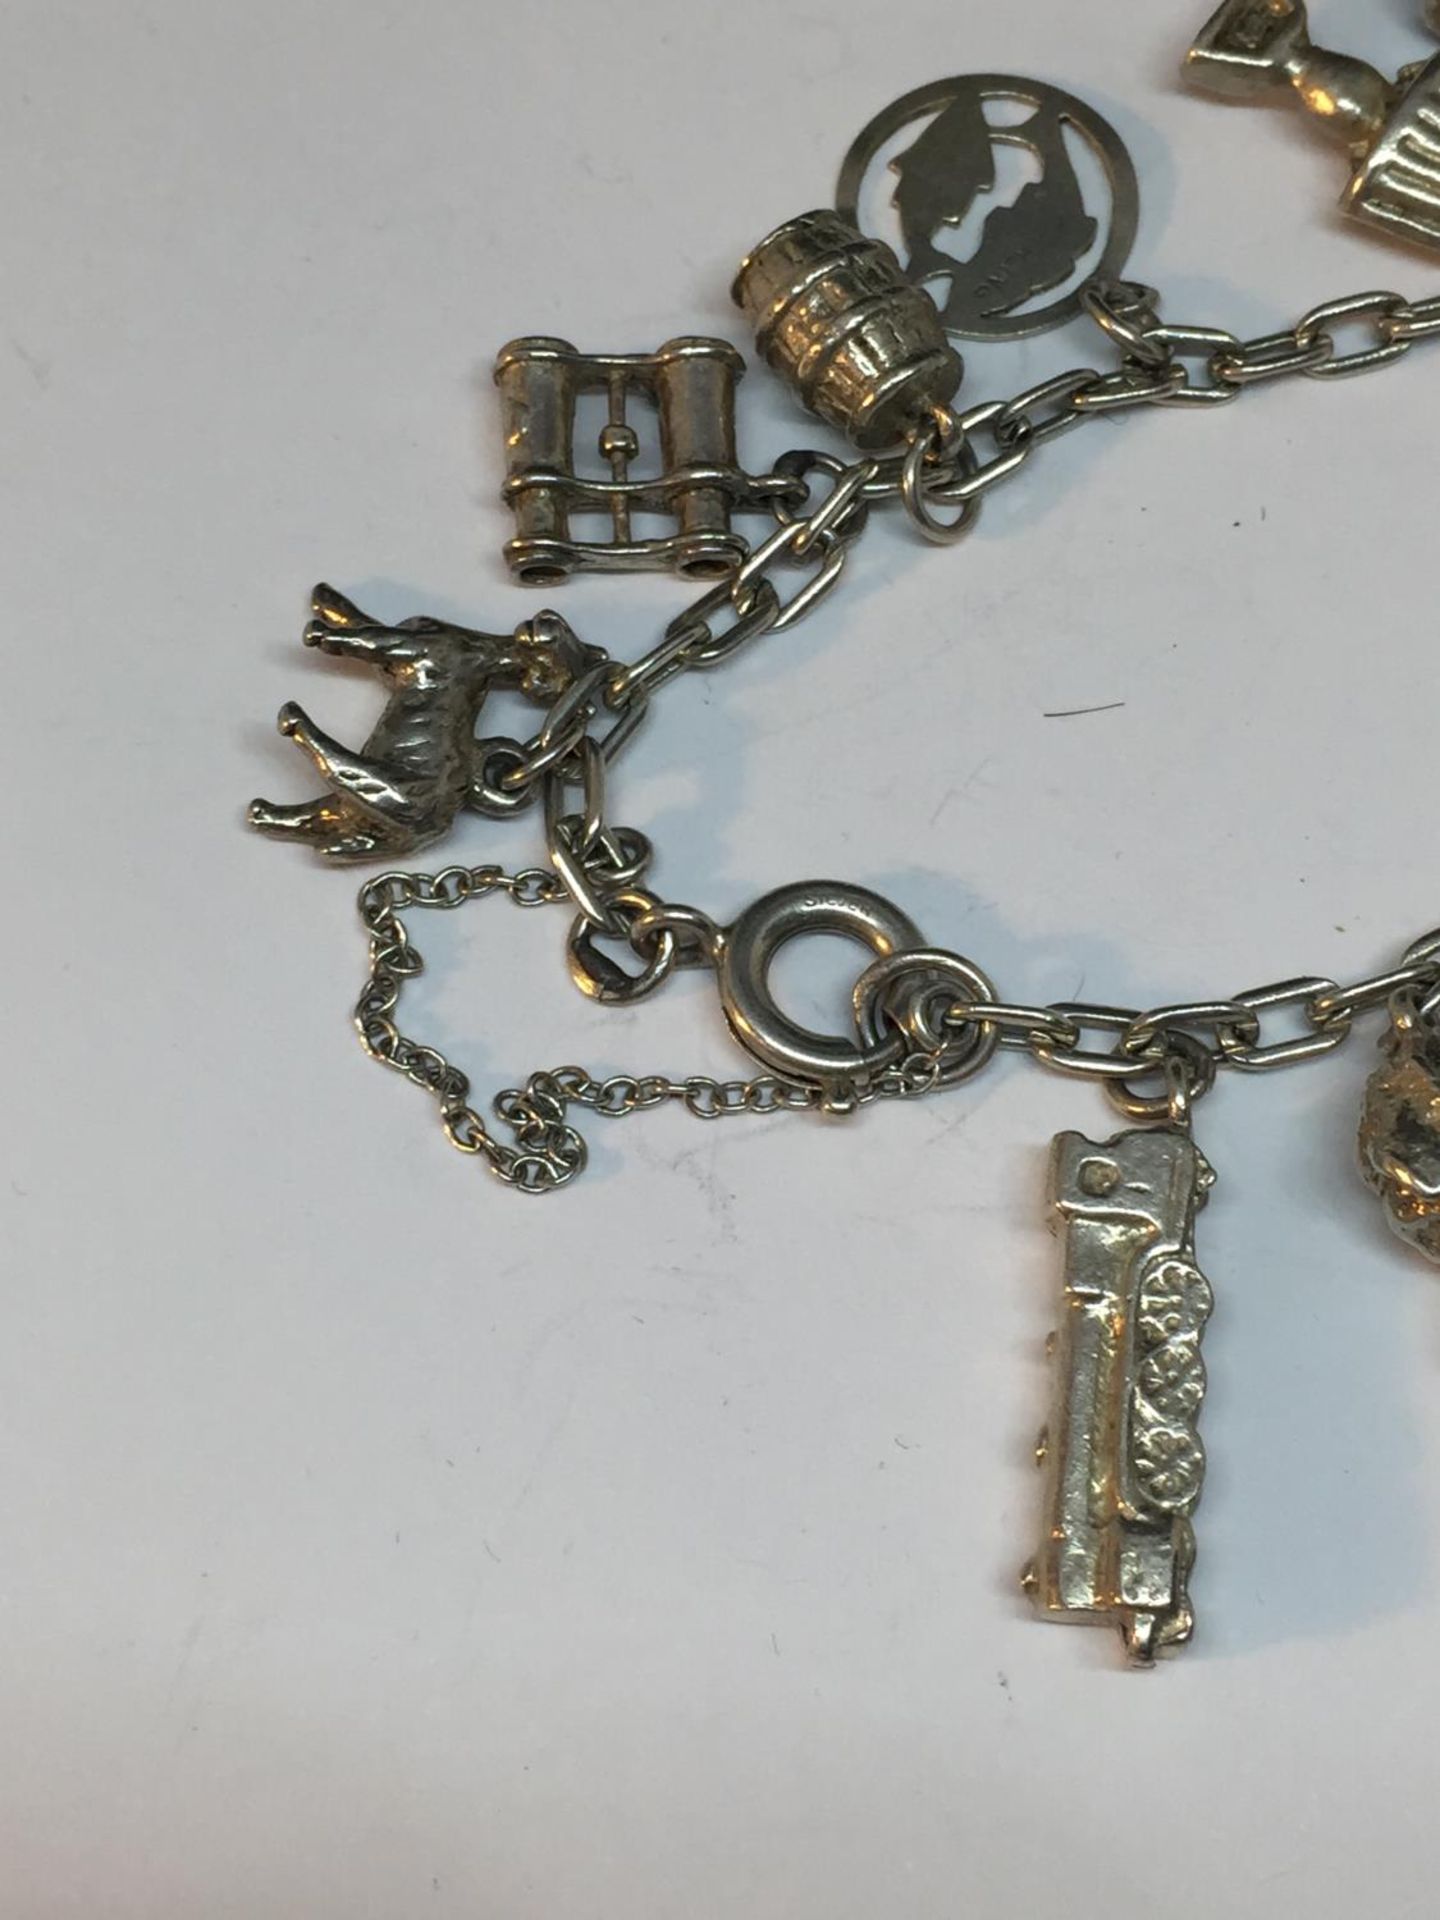 A SILVER CHARM BRACELET WITH FOURTEEN CHARMS - Image 4 of 4